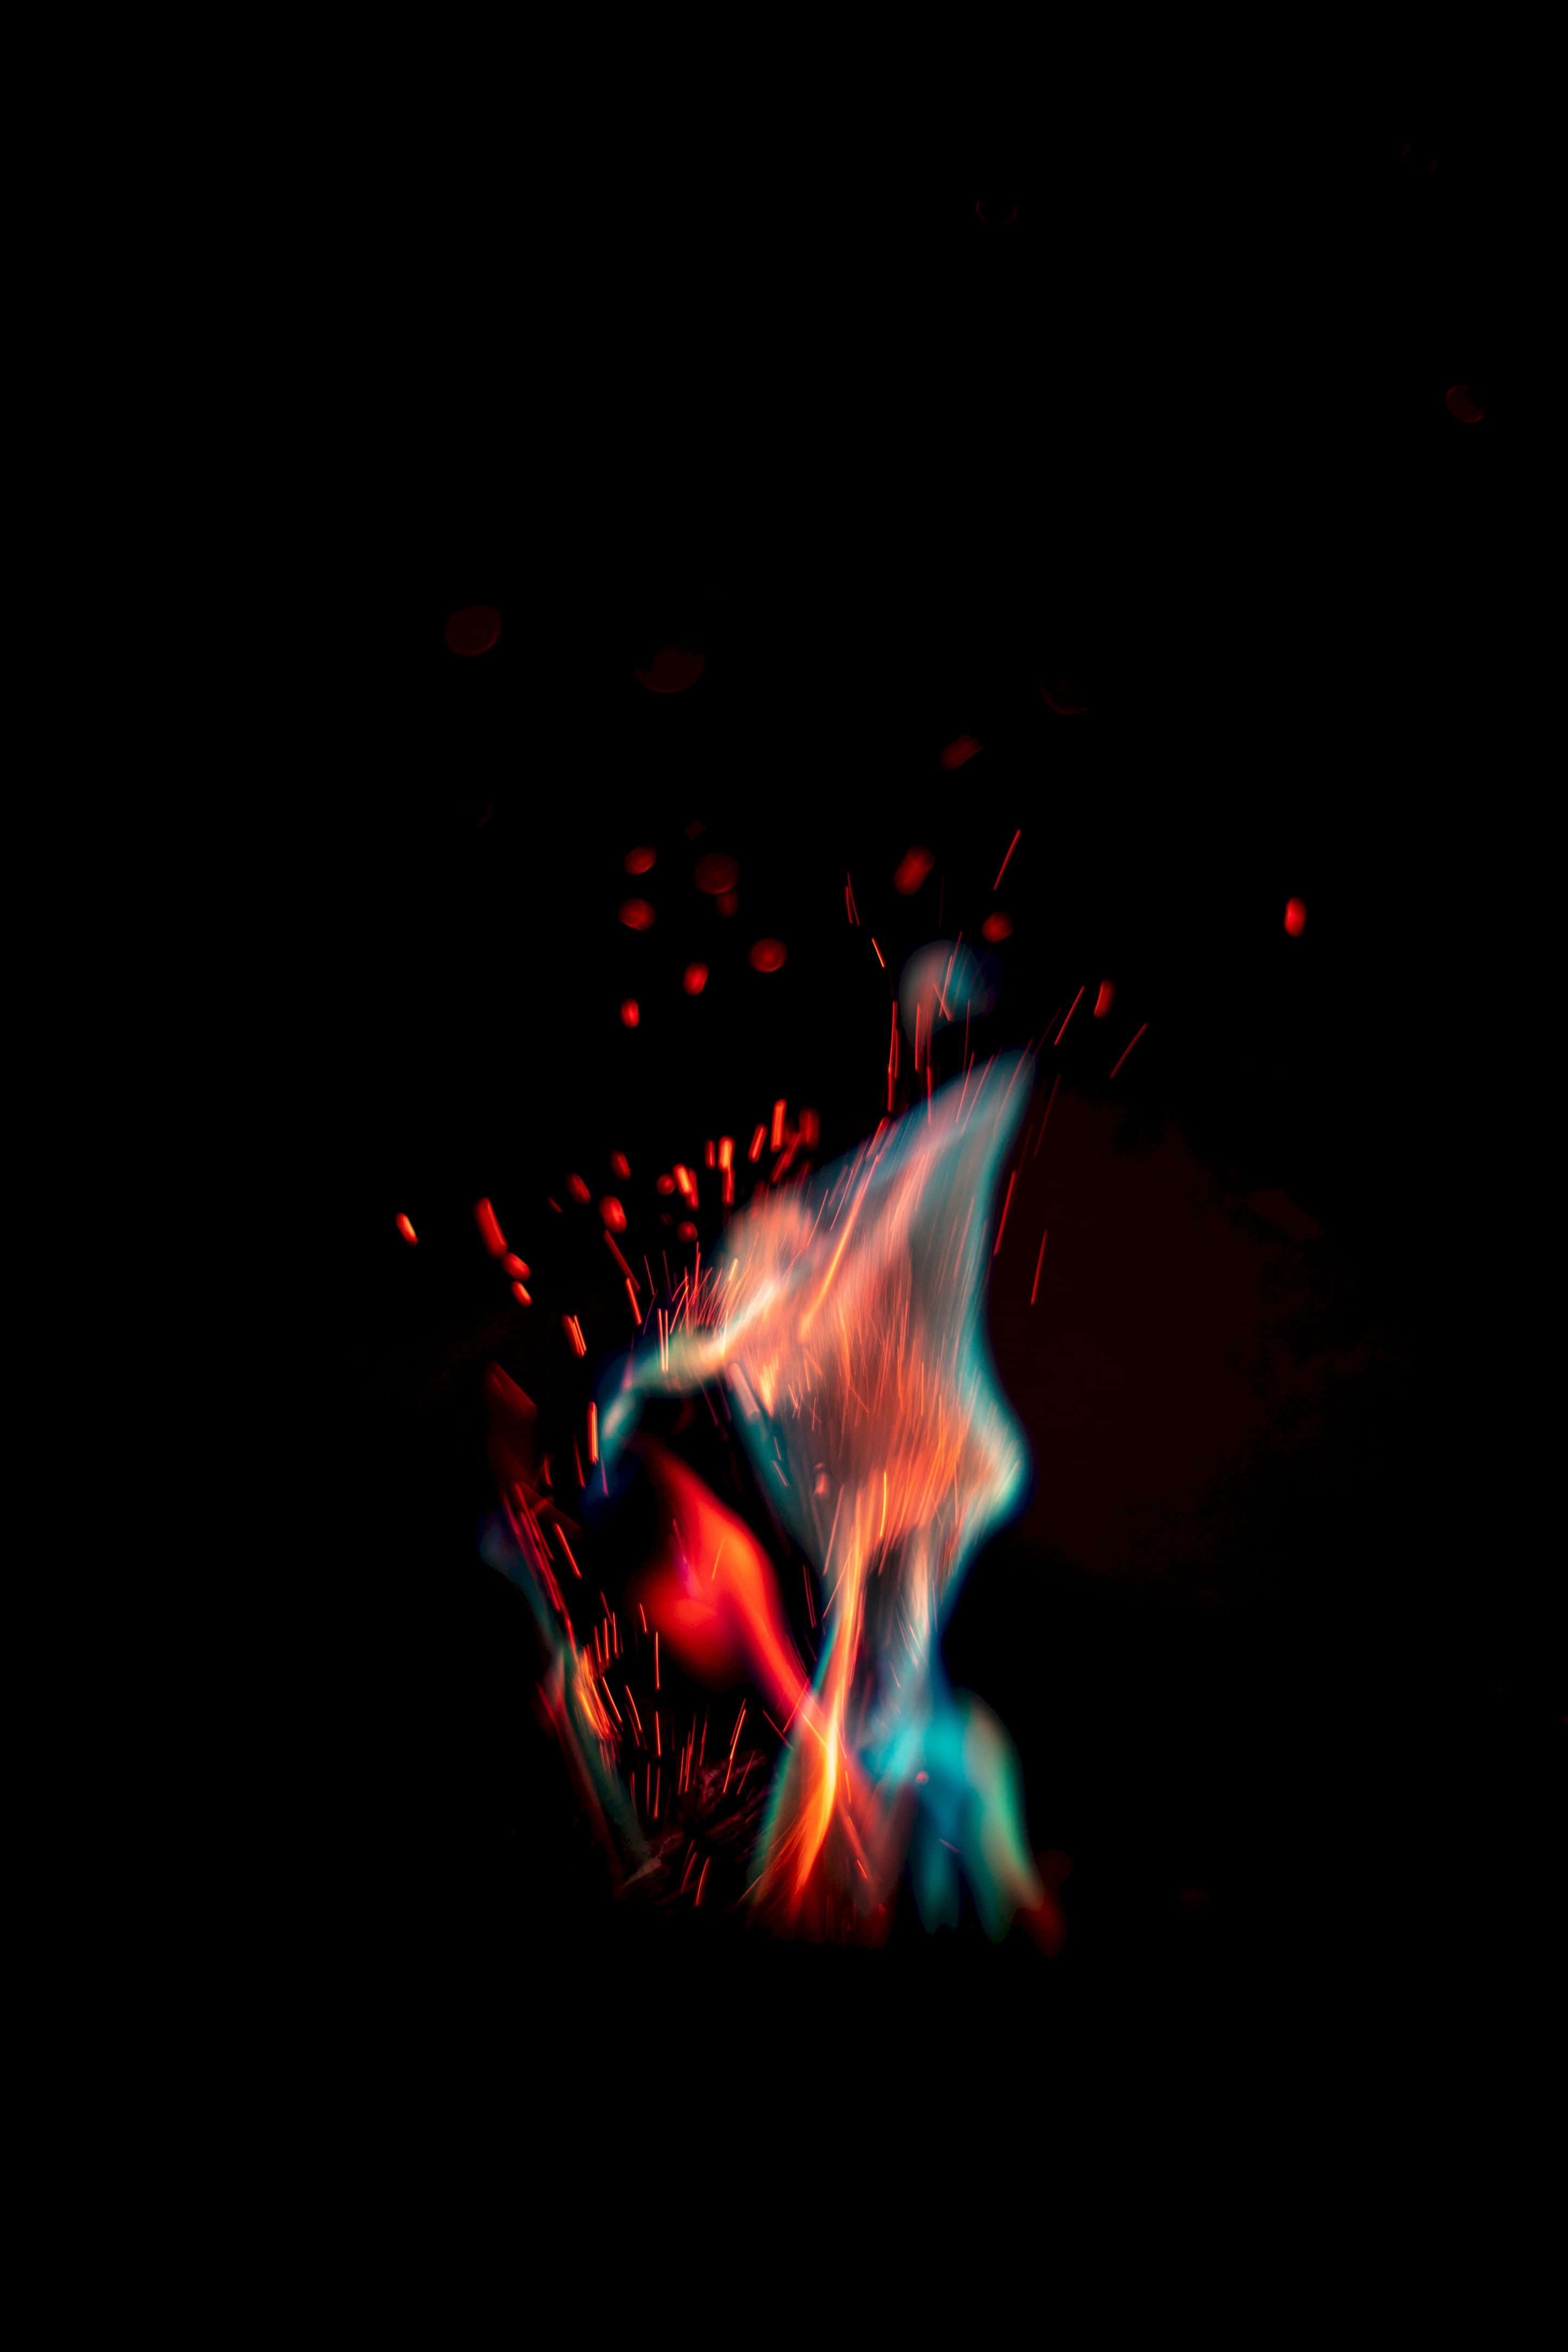 Intoxicating Beauty of Red and Blue Fire Wallpaper